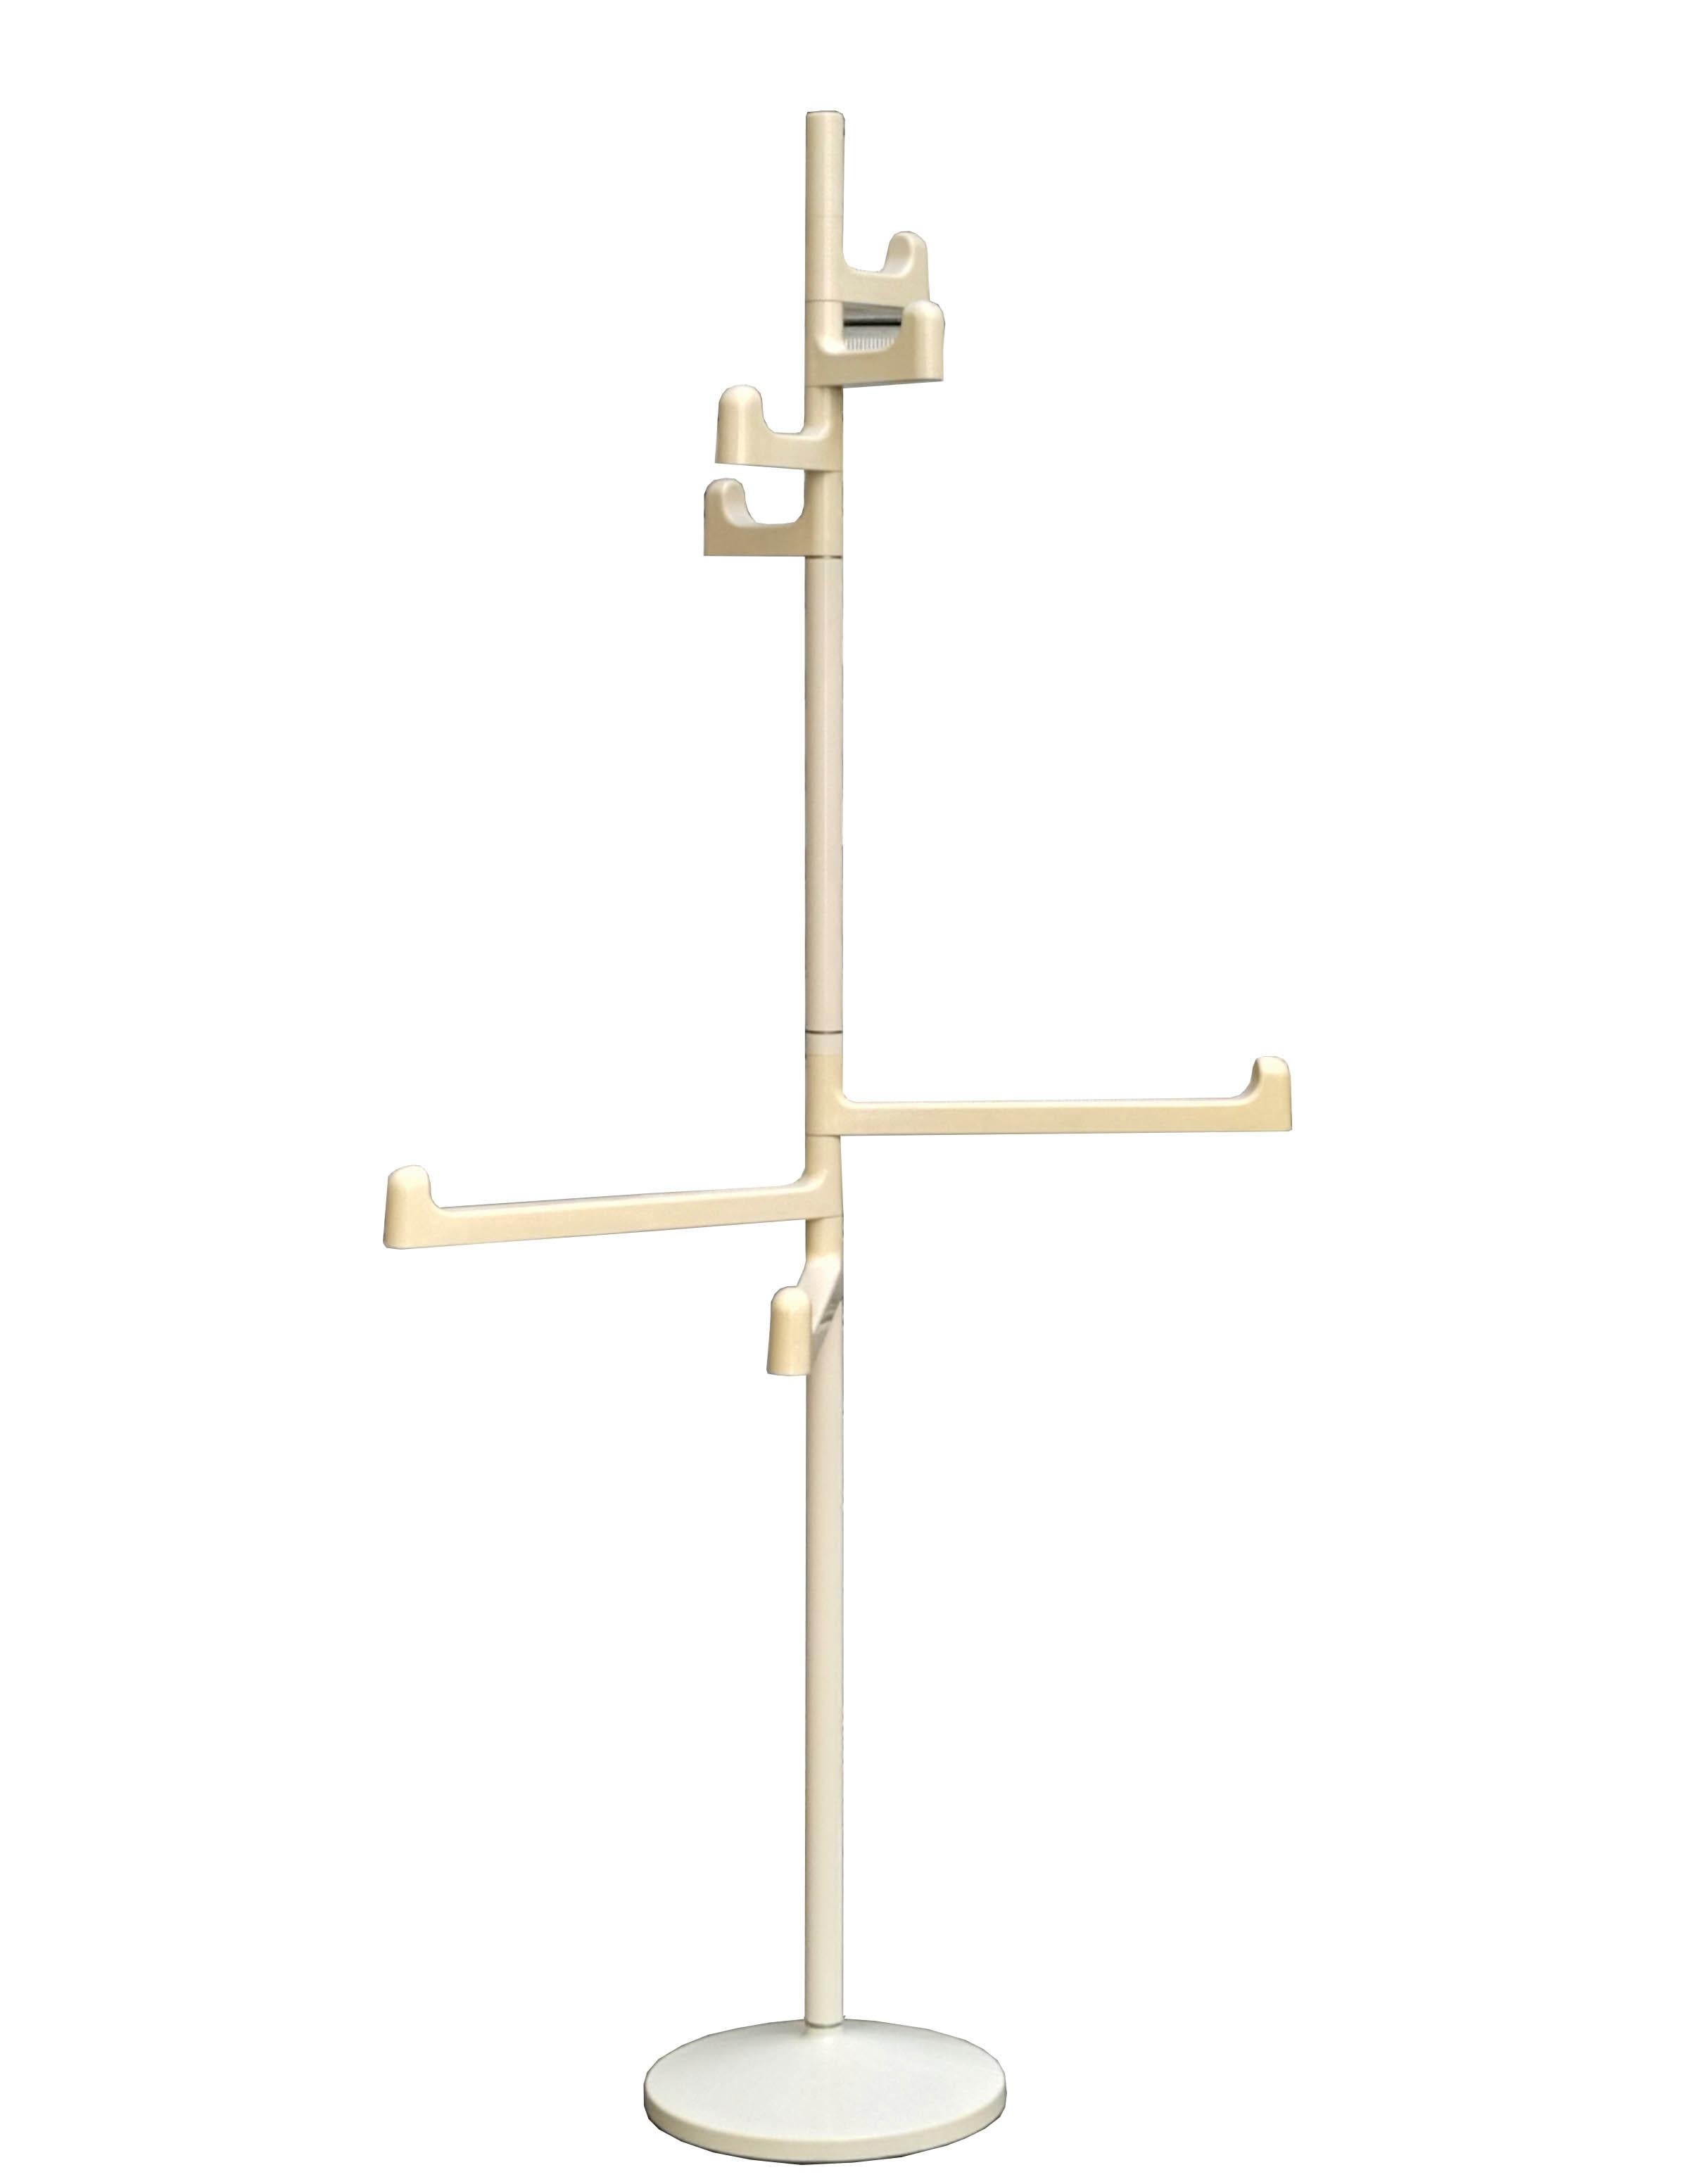 Ivory-colored 1970s plastic coat rack or towel rack by Japanese designer Makio Hasuike and made in Italy by Gedy. The large arms are adjustable and measure 39 cm; the small arms are fixed and measure 13.5 cm.